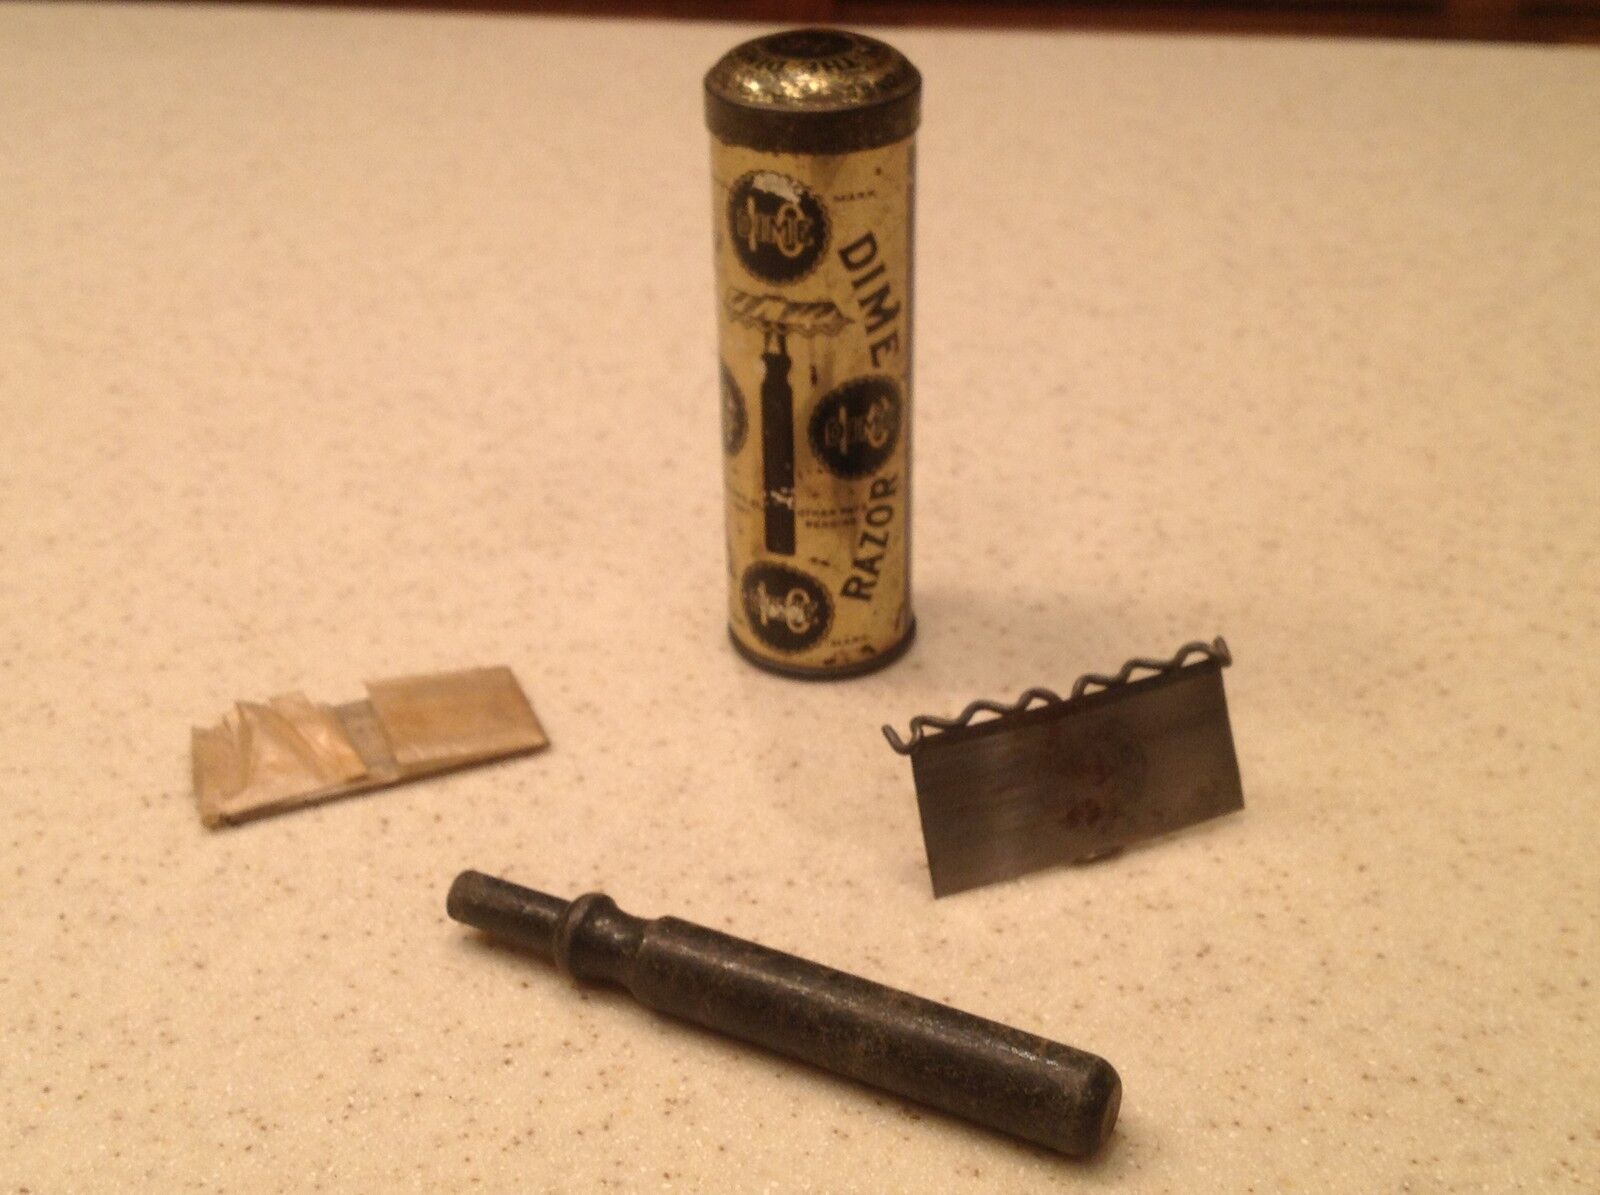 Antique & RARE Find Dime Sfety Razor In Tin Litho Cansiter Pat Date 1907 NICE